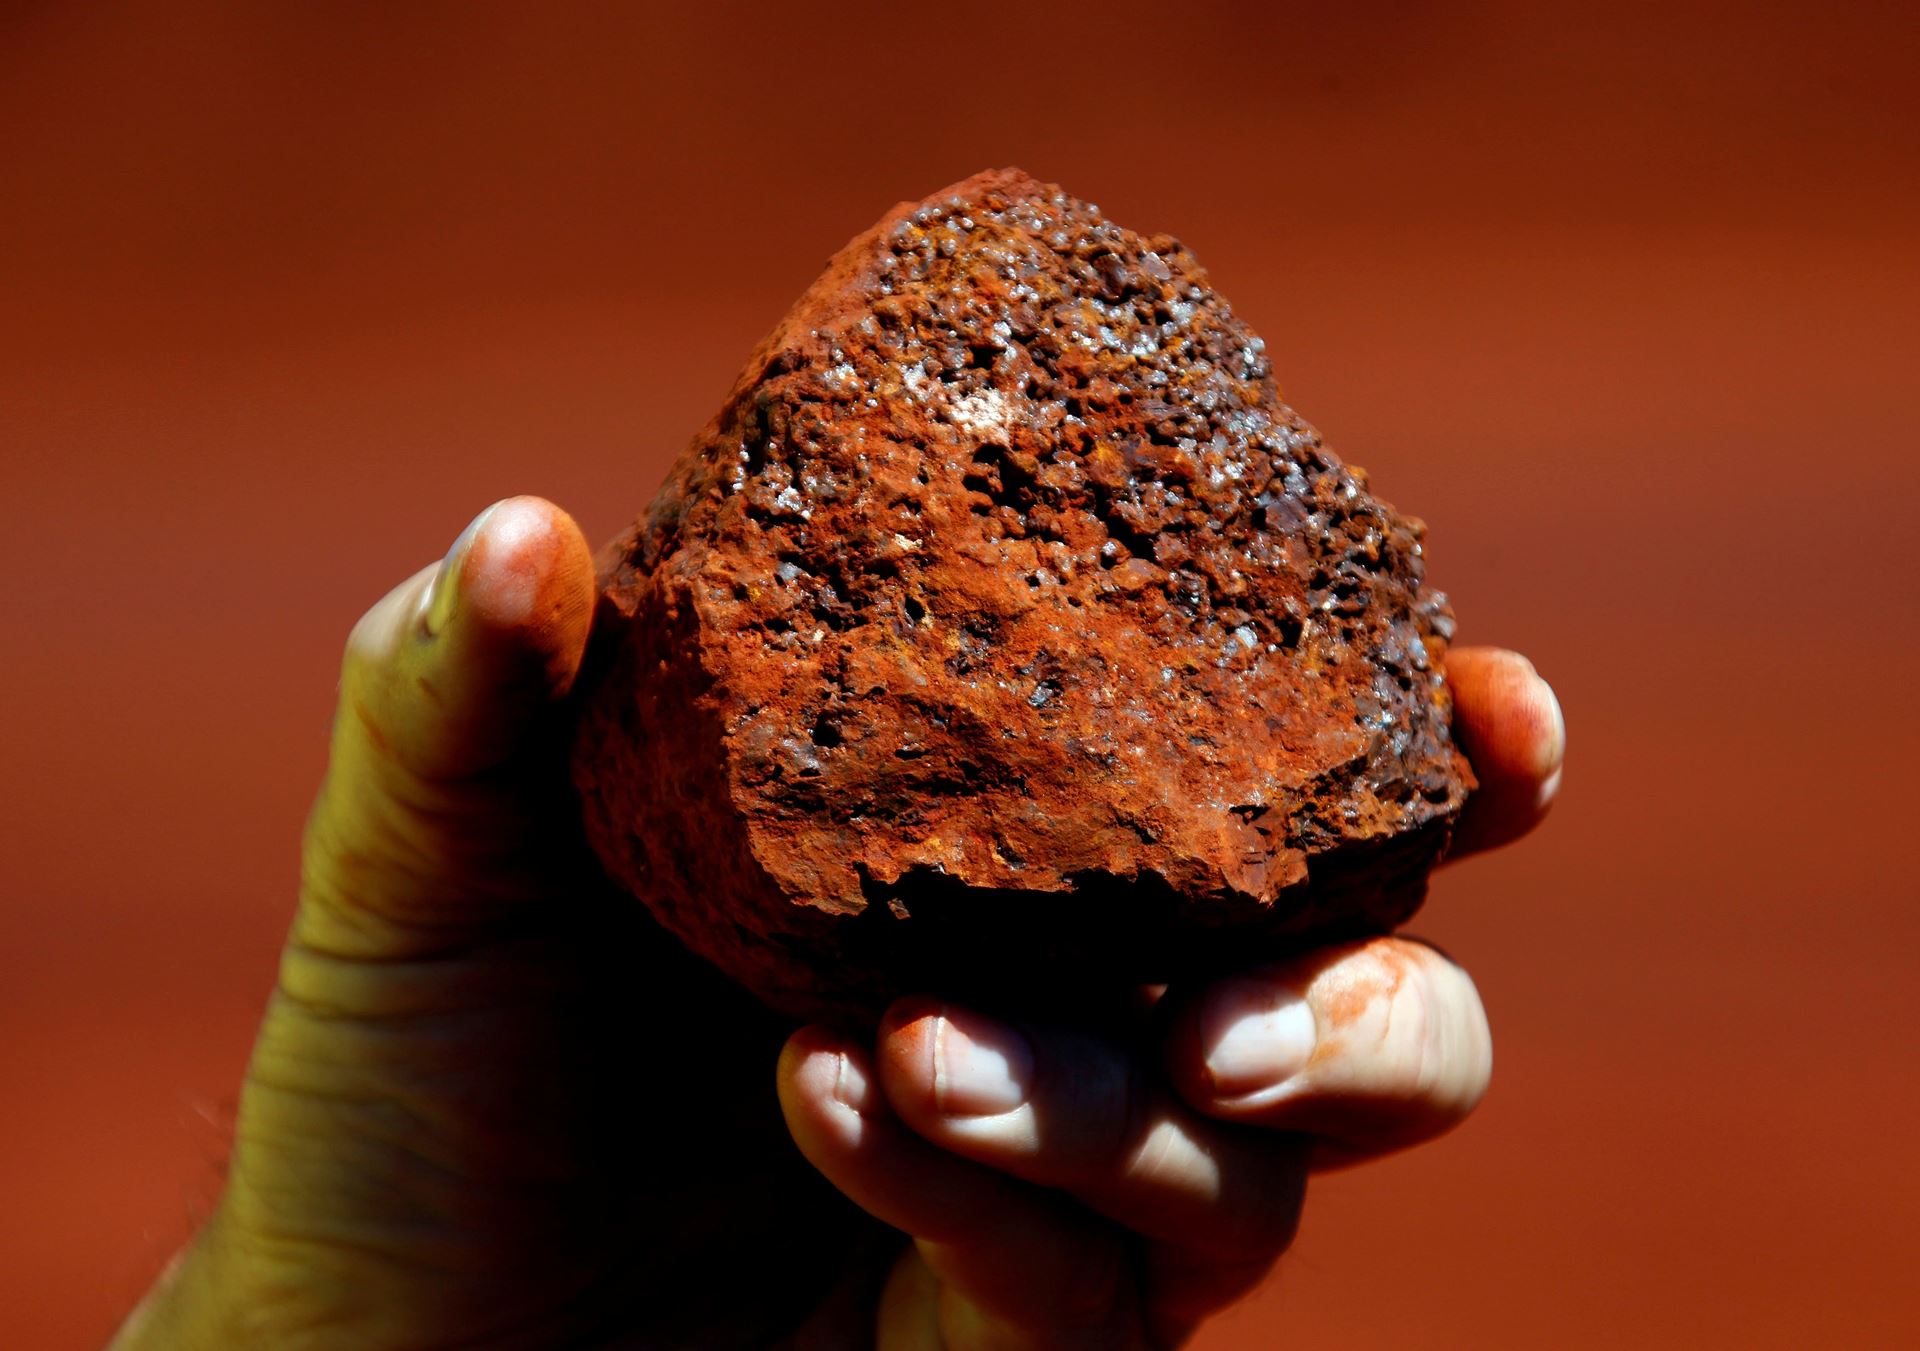 Iron ore decreased in the US due to low financial values